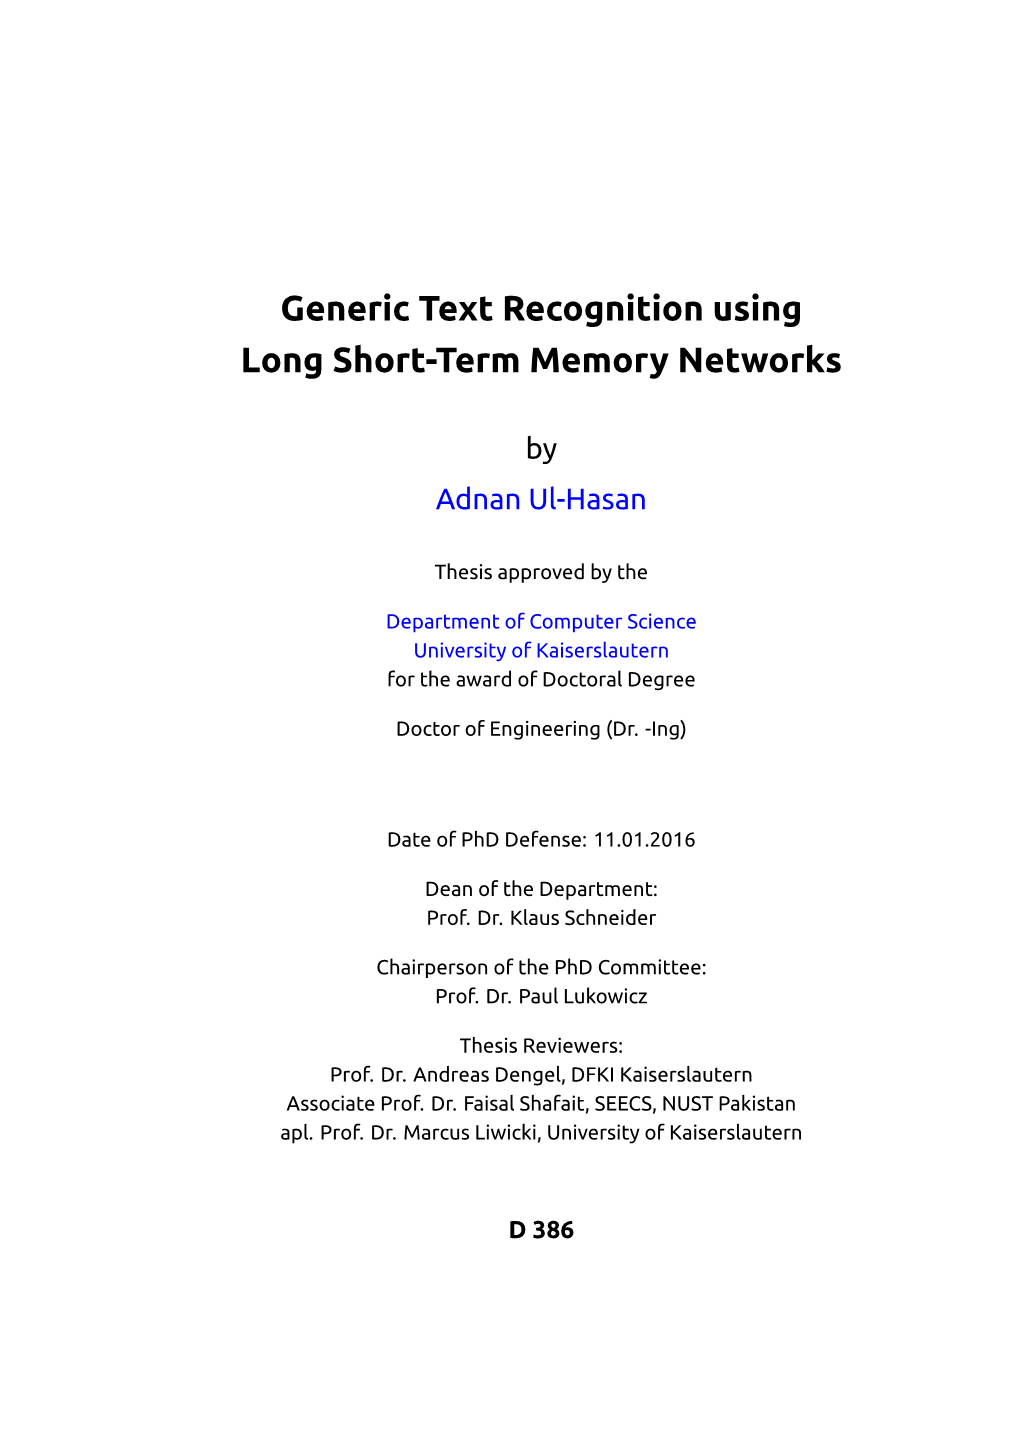 Generic Text Recognition Using Long Short-Term Memory Networks